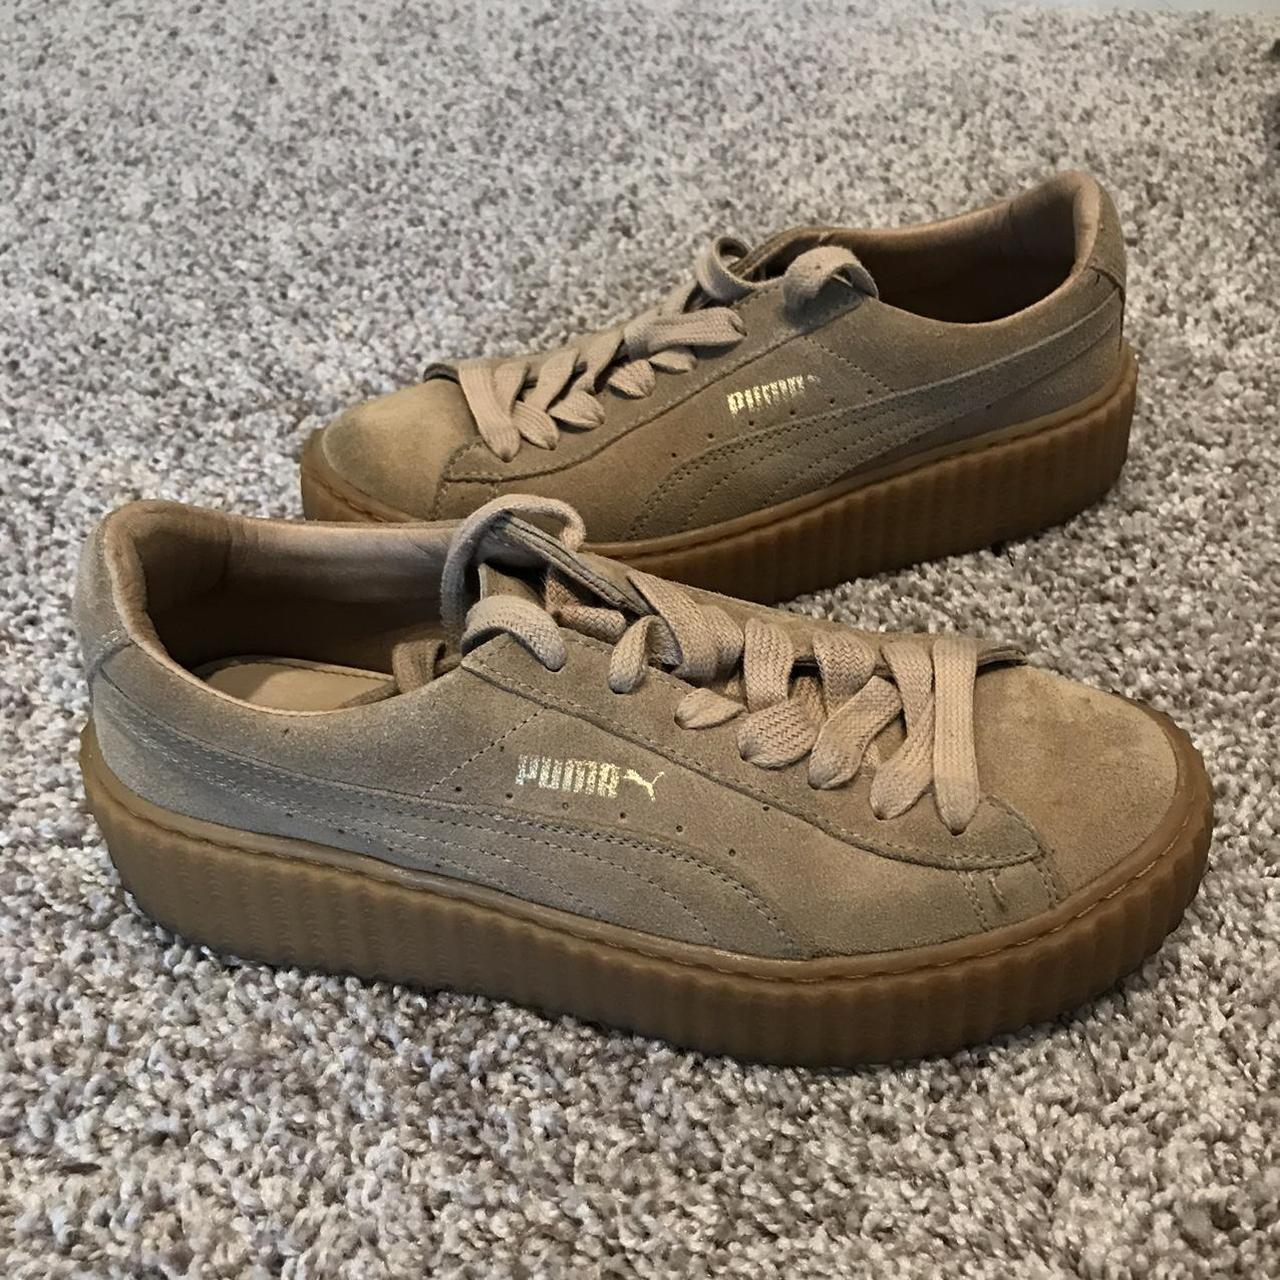 tan suede creepers by Rihanna | worn a... - Depop